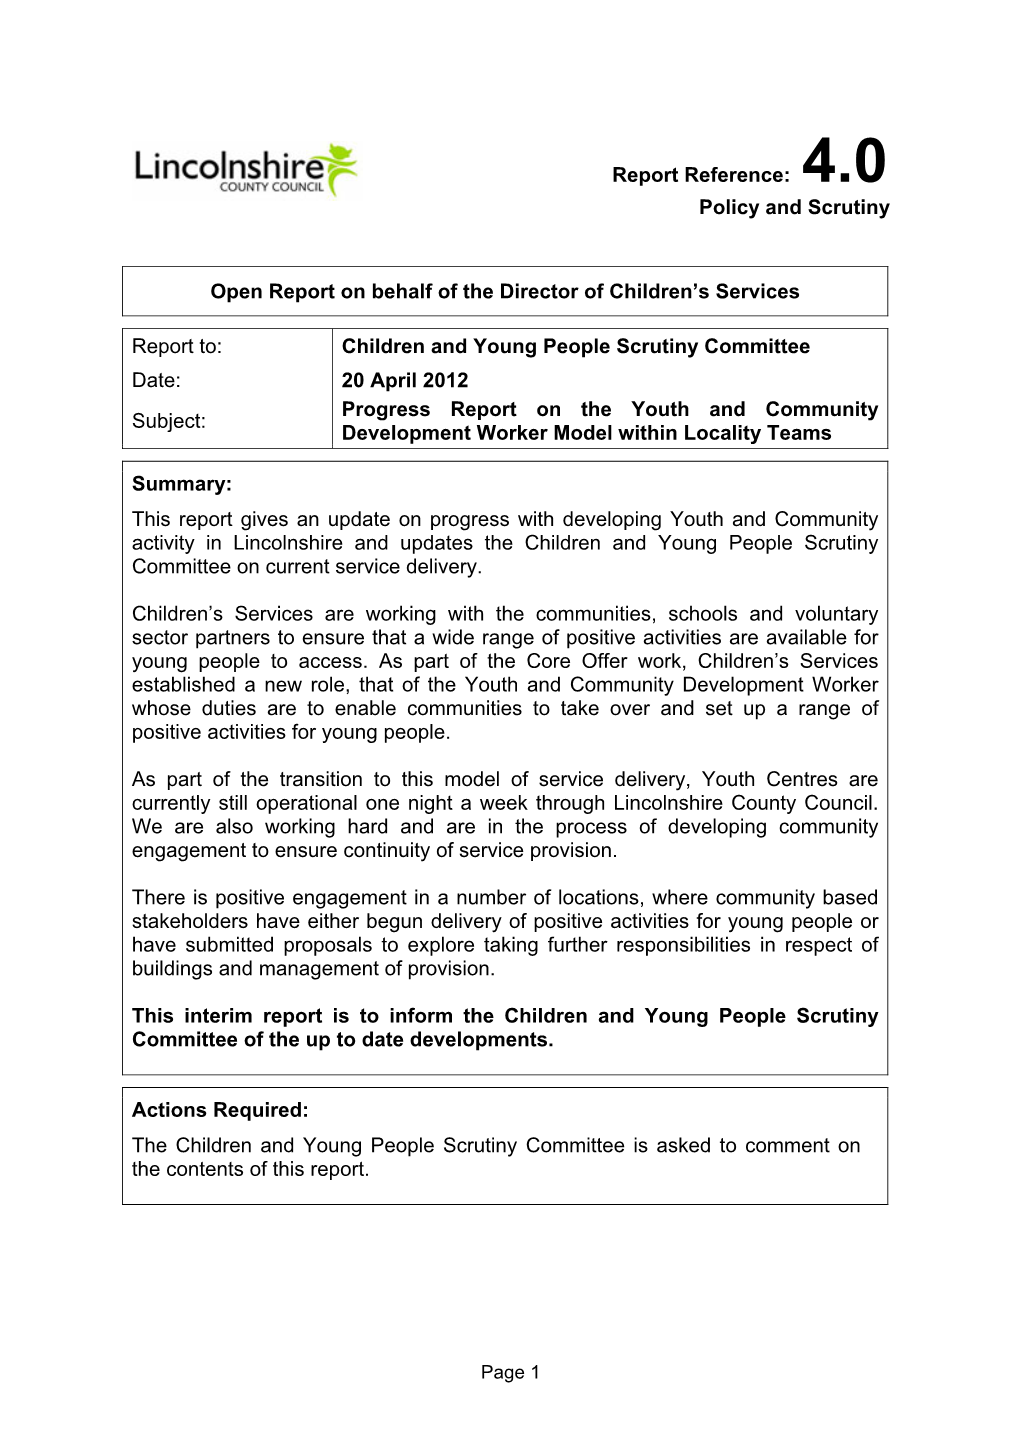 Children and Young People Scrutiny Committee Date: 20 April 2012 Progress Report on the Youth and Community Subject: Development Worker Model Within Locality Teams